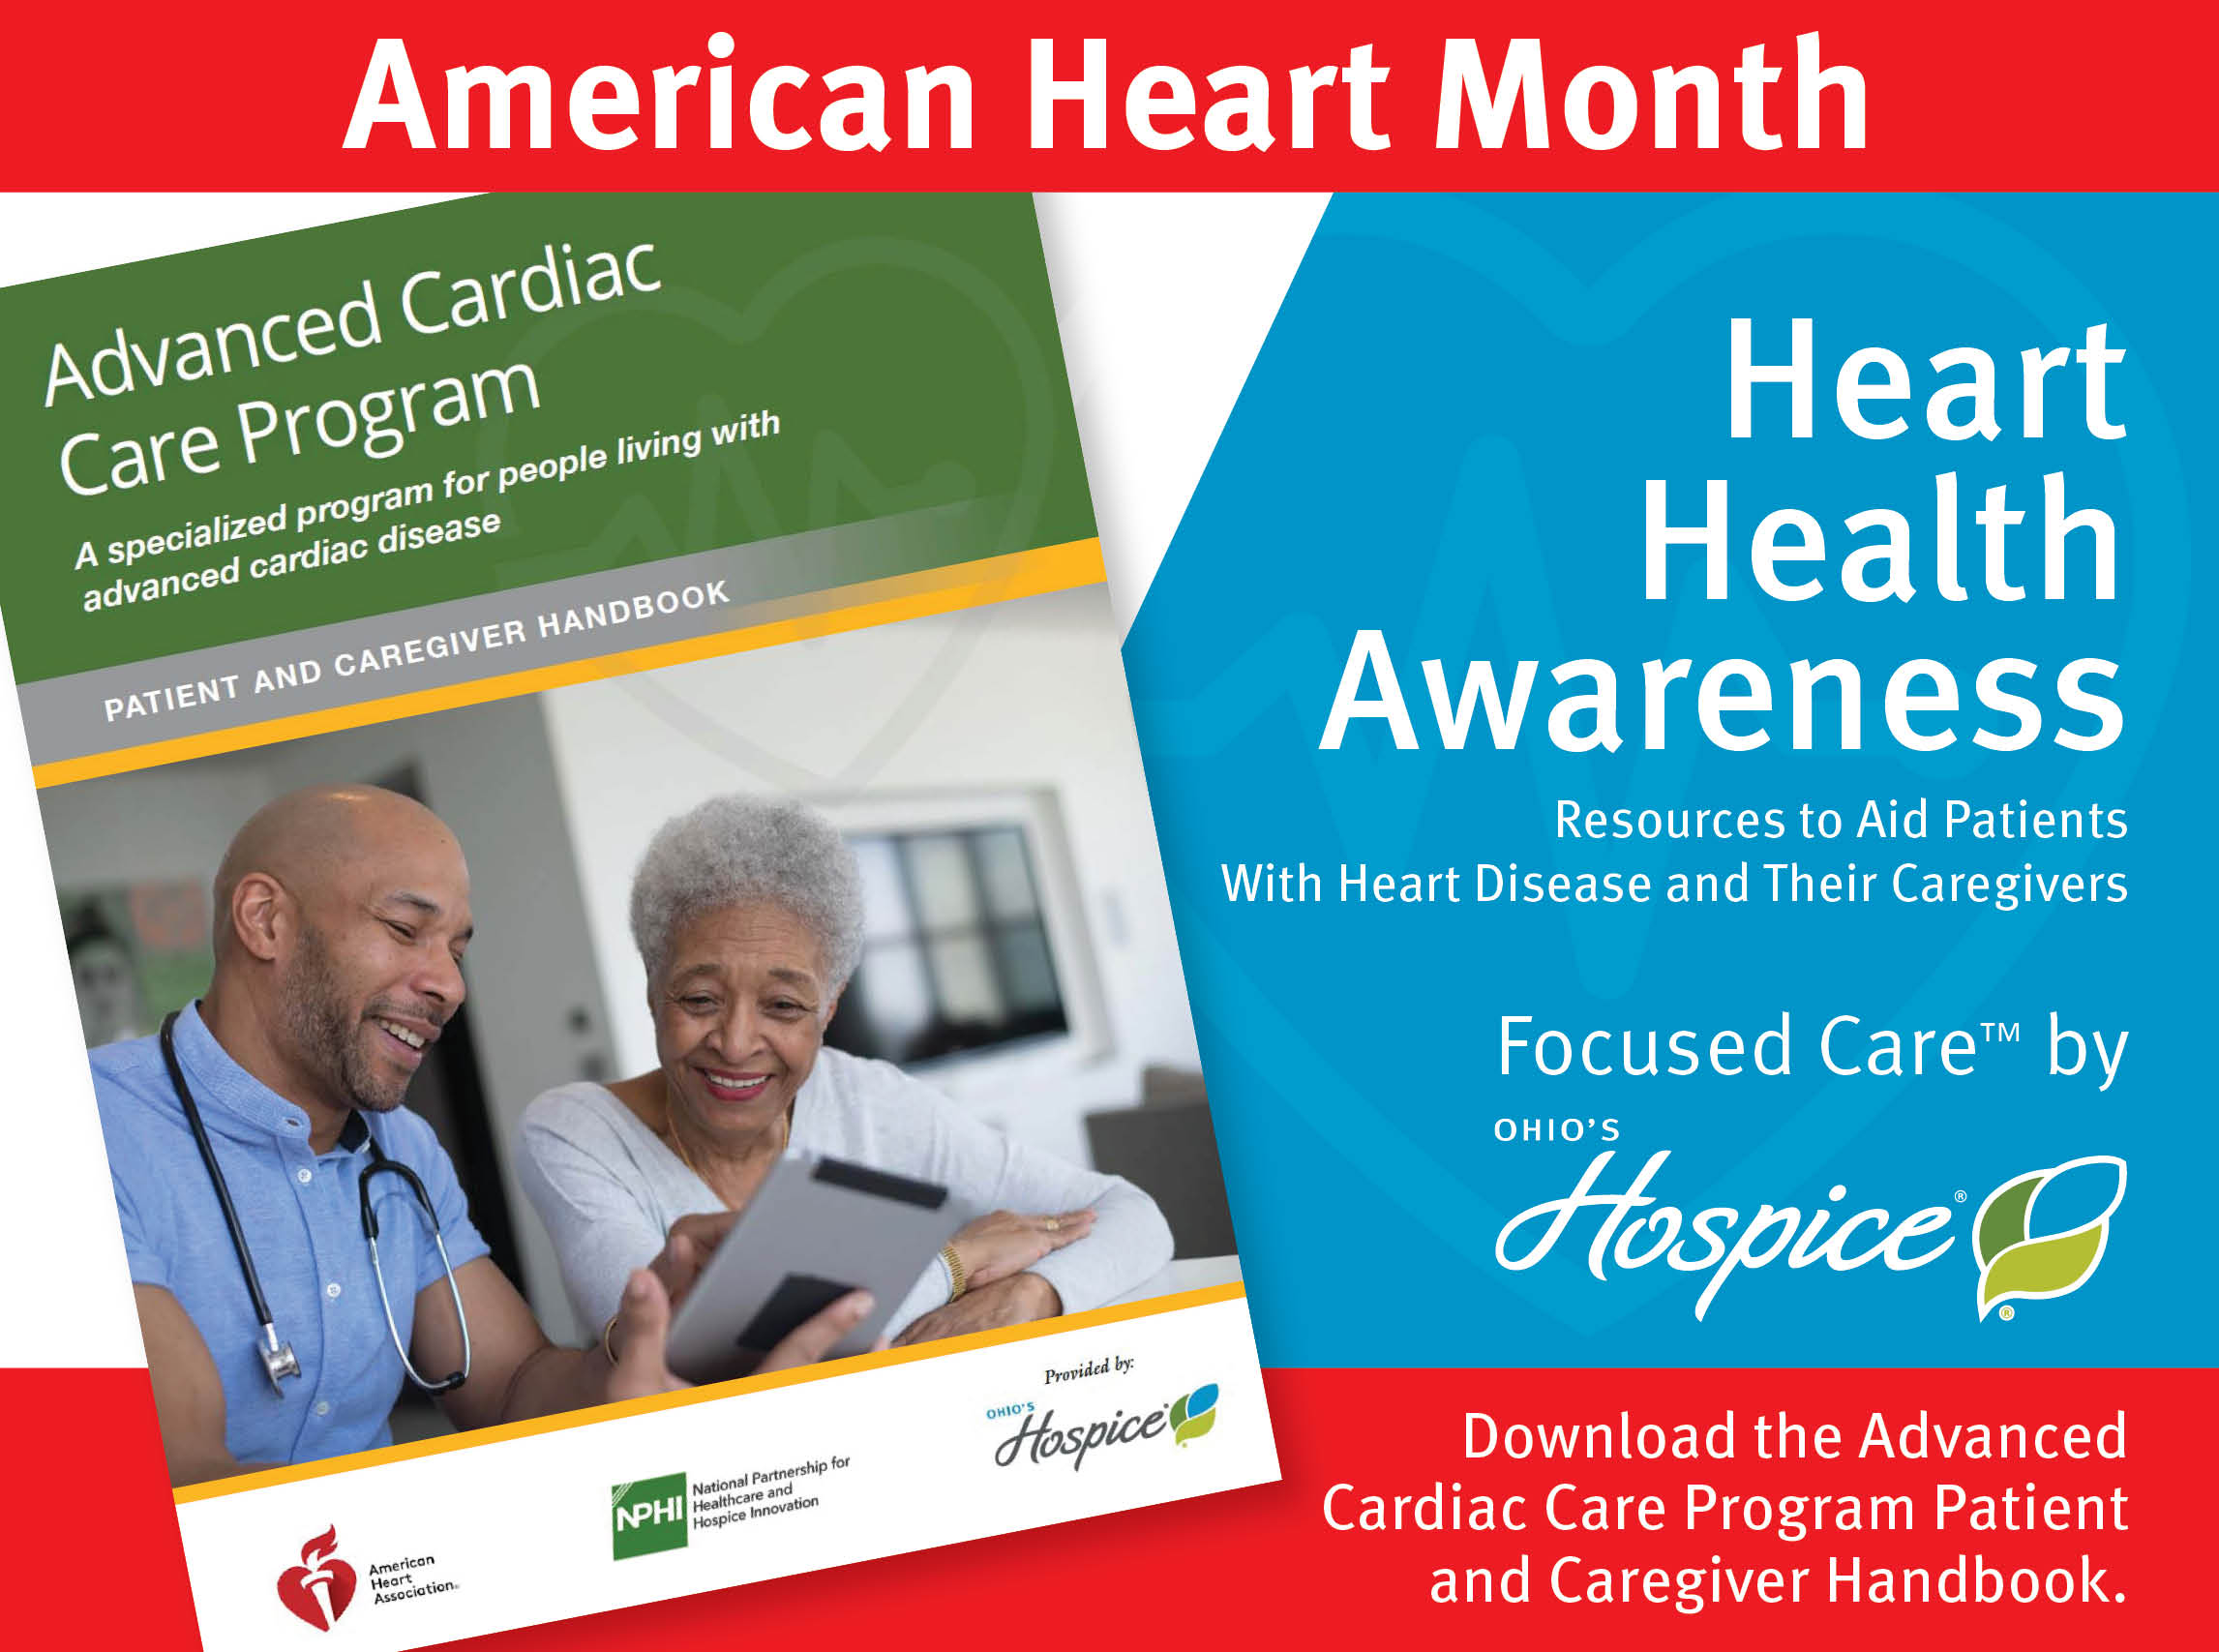 Heart Health Awareness. Resources to Aid Patients With Heart Disease and Their Caregivers. Focused Care by Ohio's Hospice